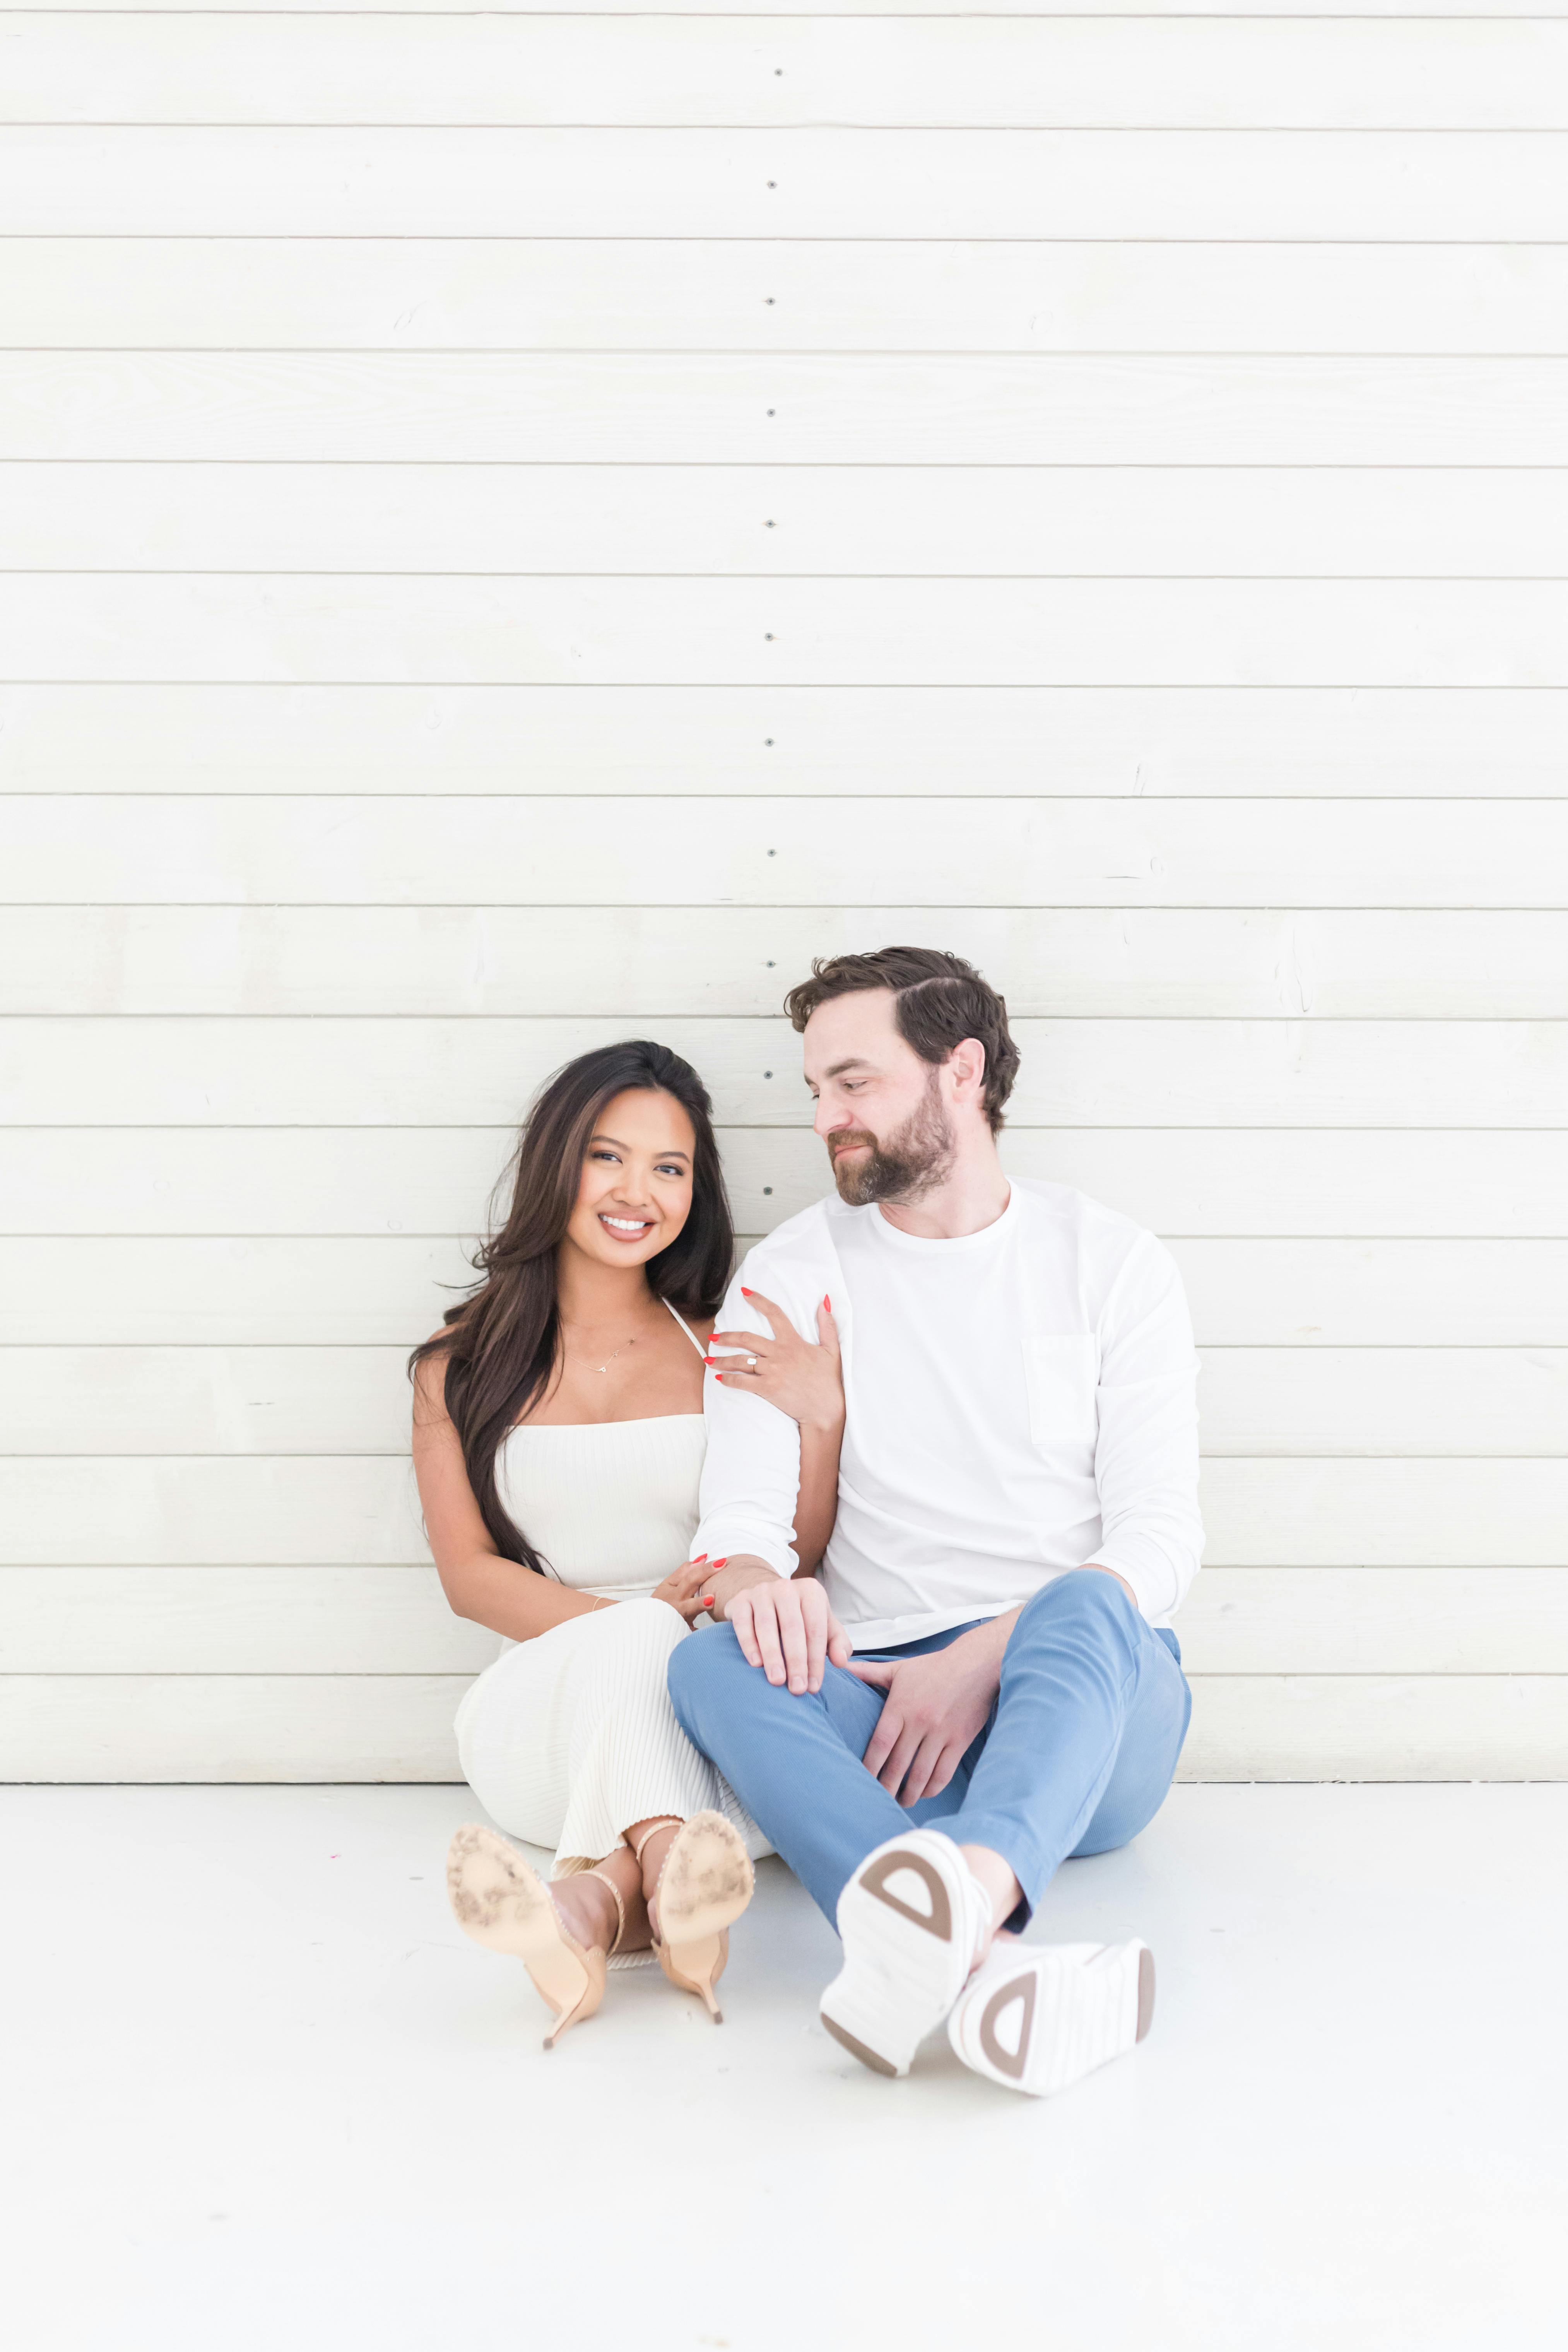 60+ Witty Couple Photoshoot Ideas For Those Getting Hitched